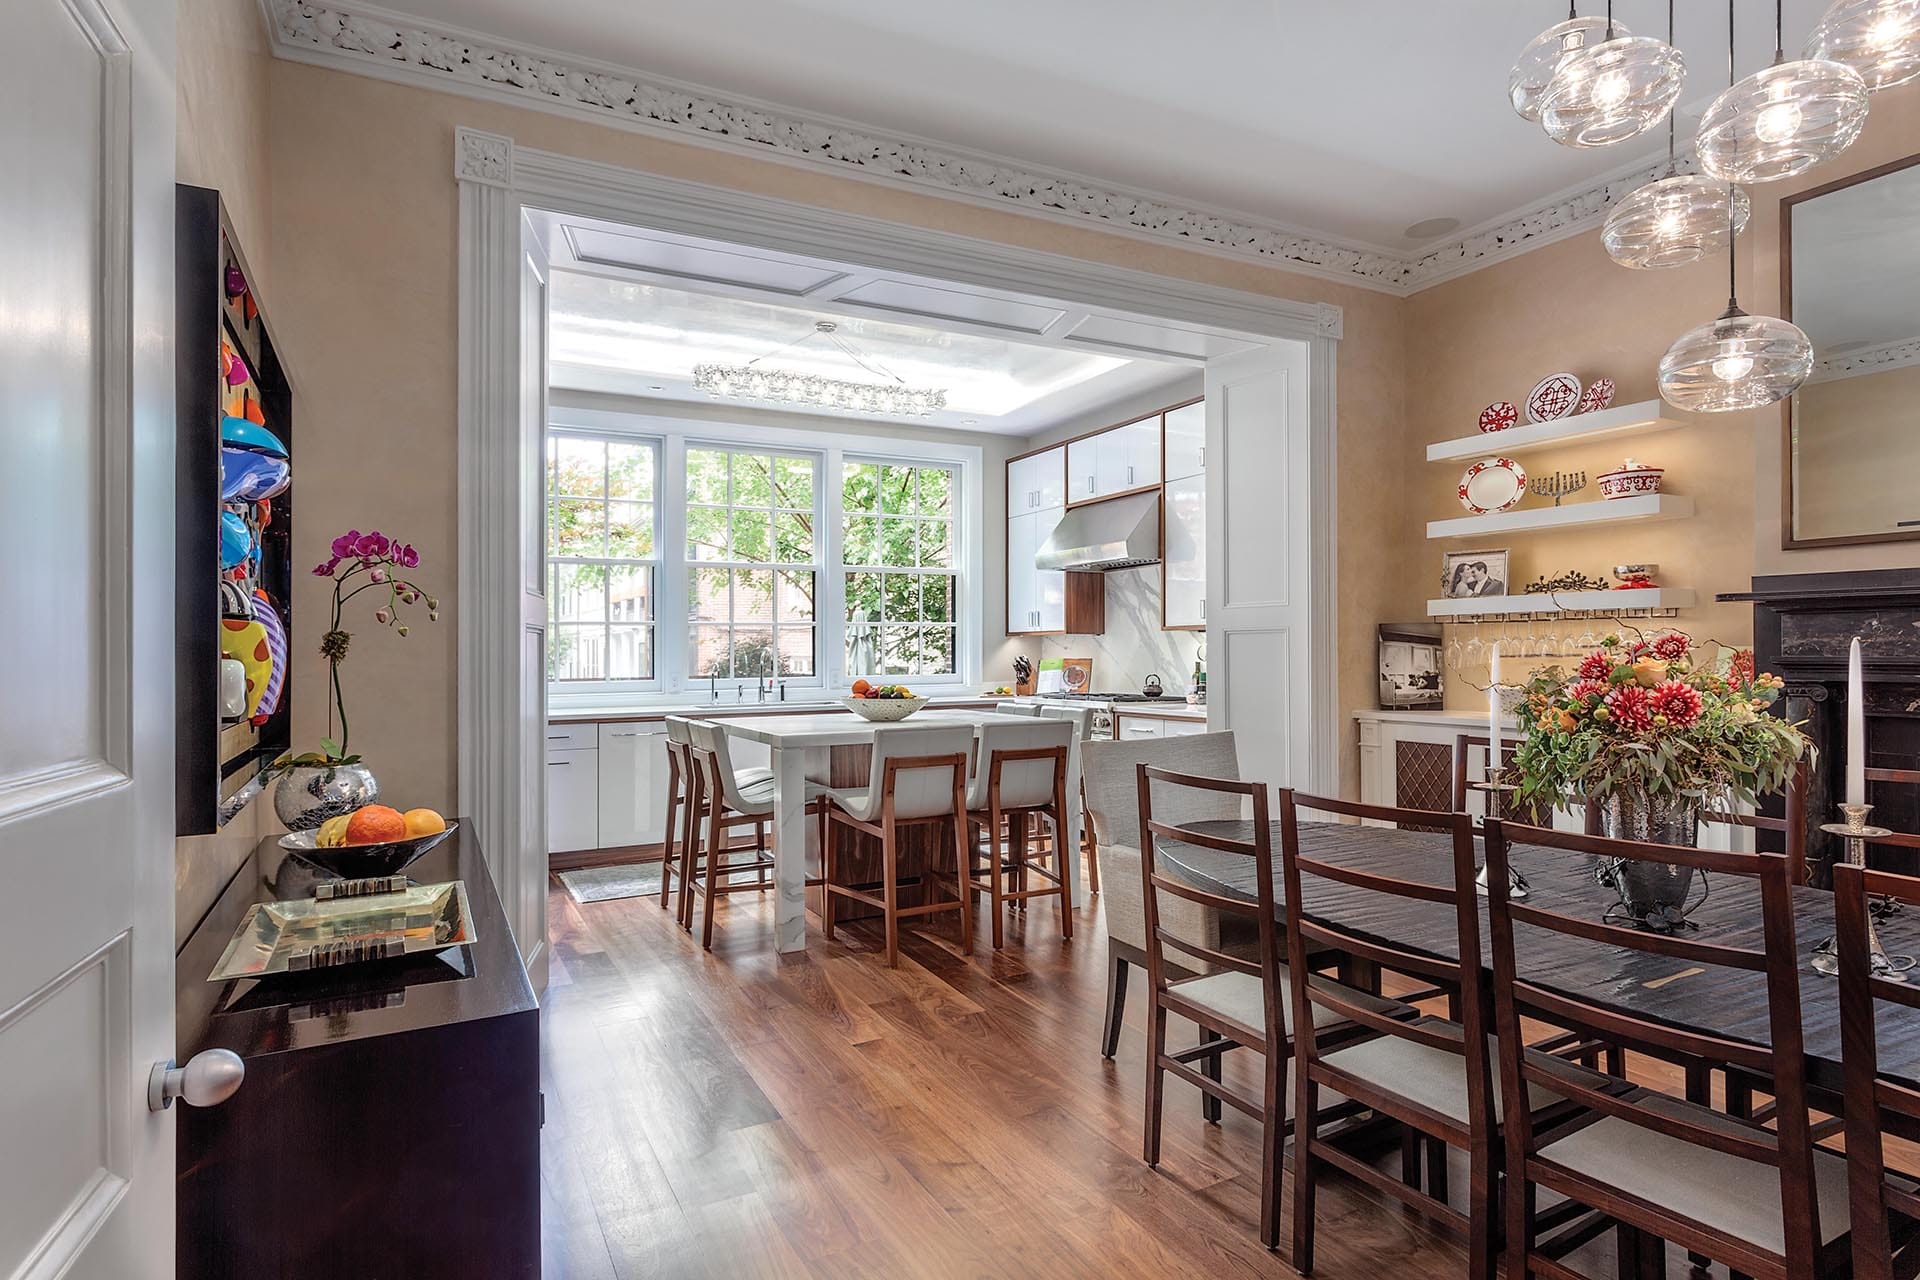 View from dining room to the kitchen with an enlarged opening, preserved crown molding, and modern fuurnishings